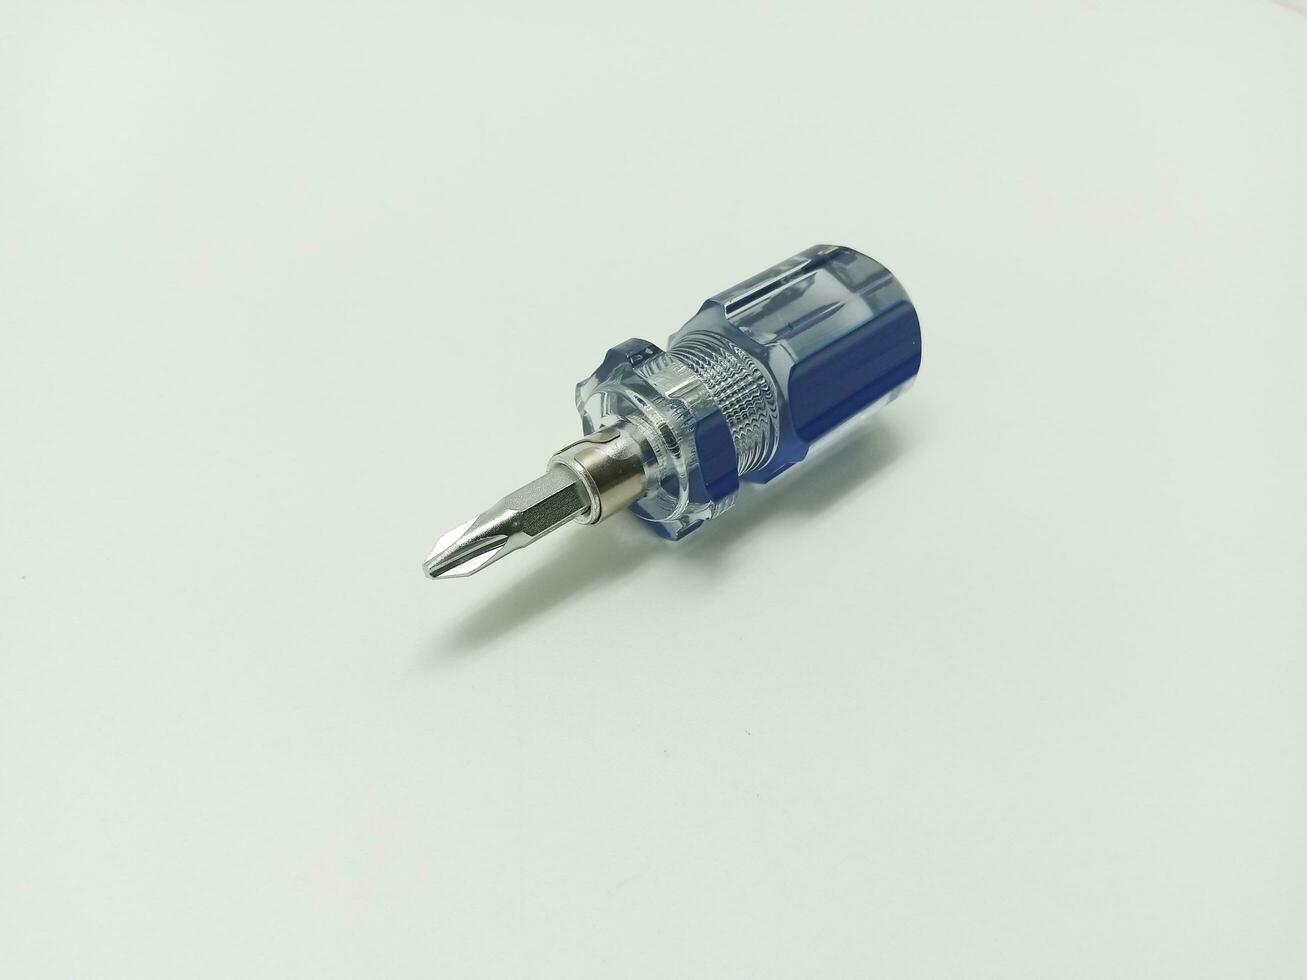 screwdriver photo with white background 12